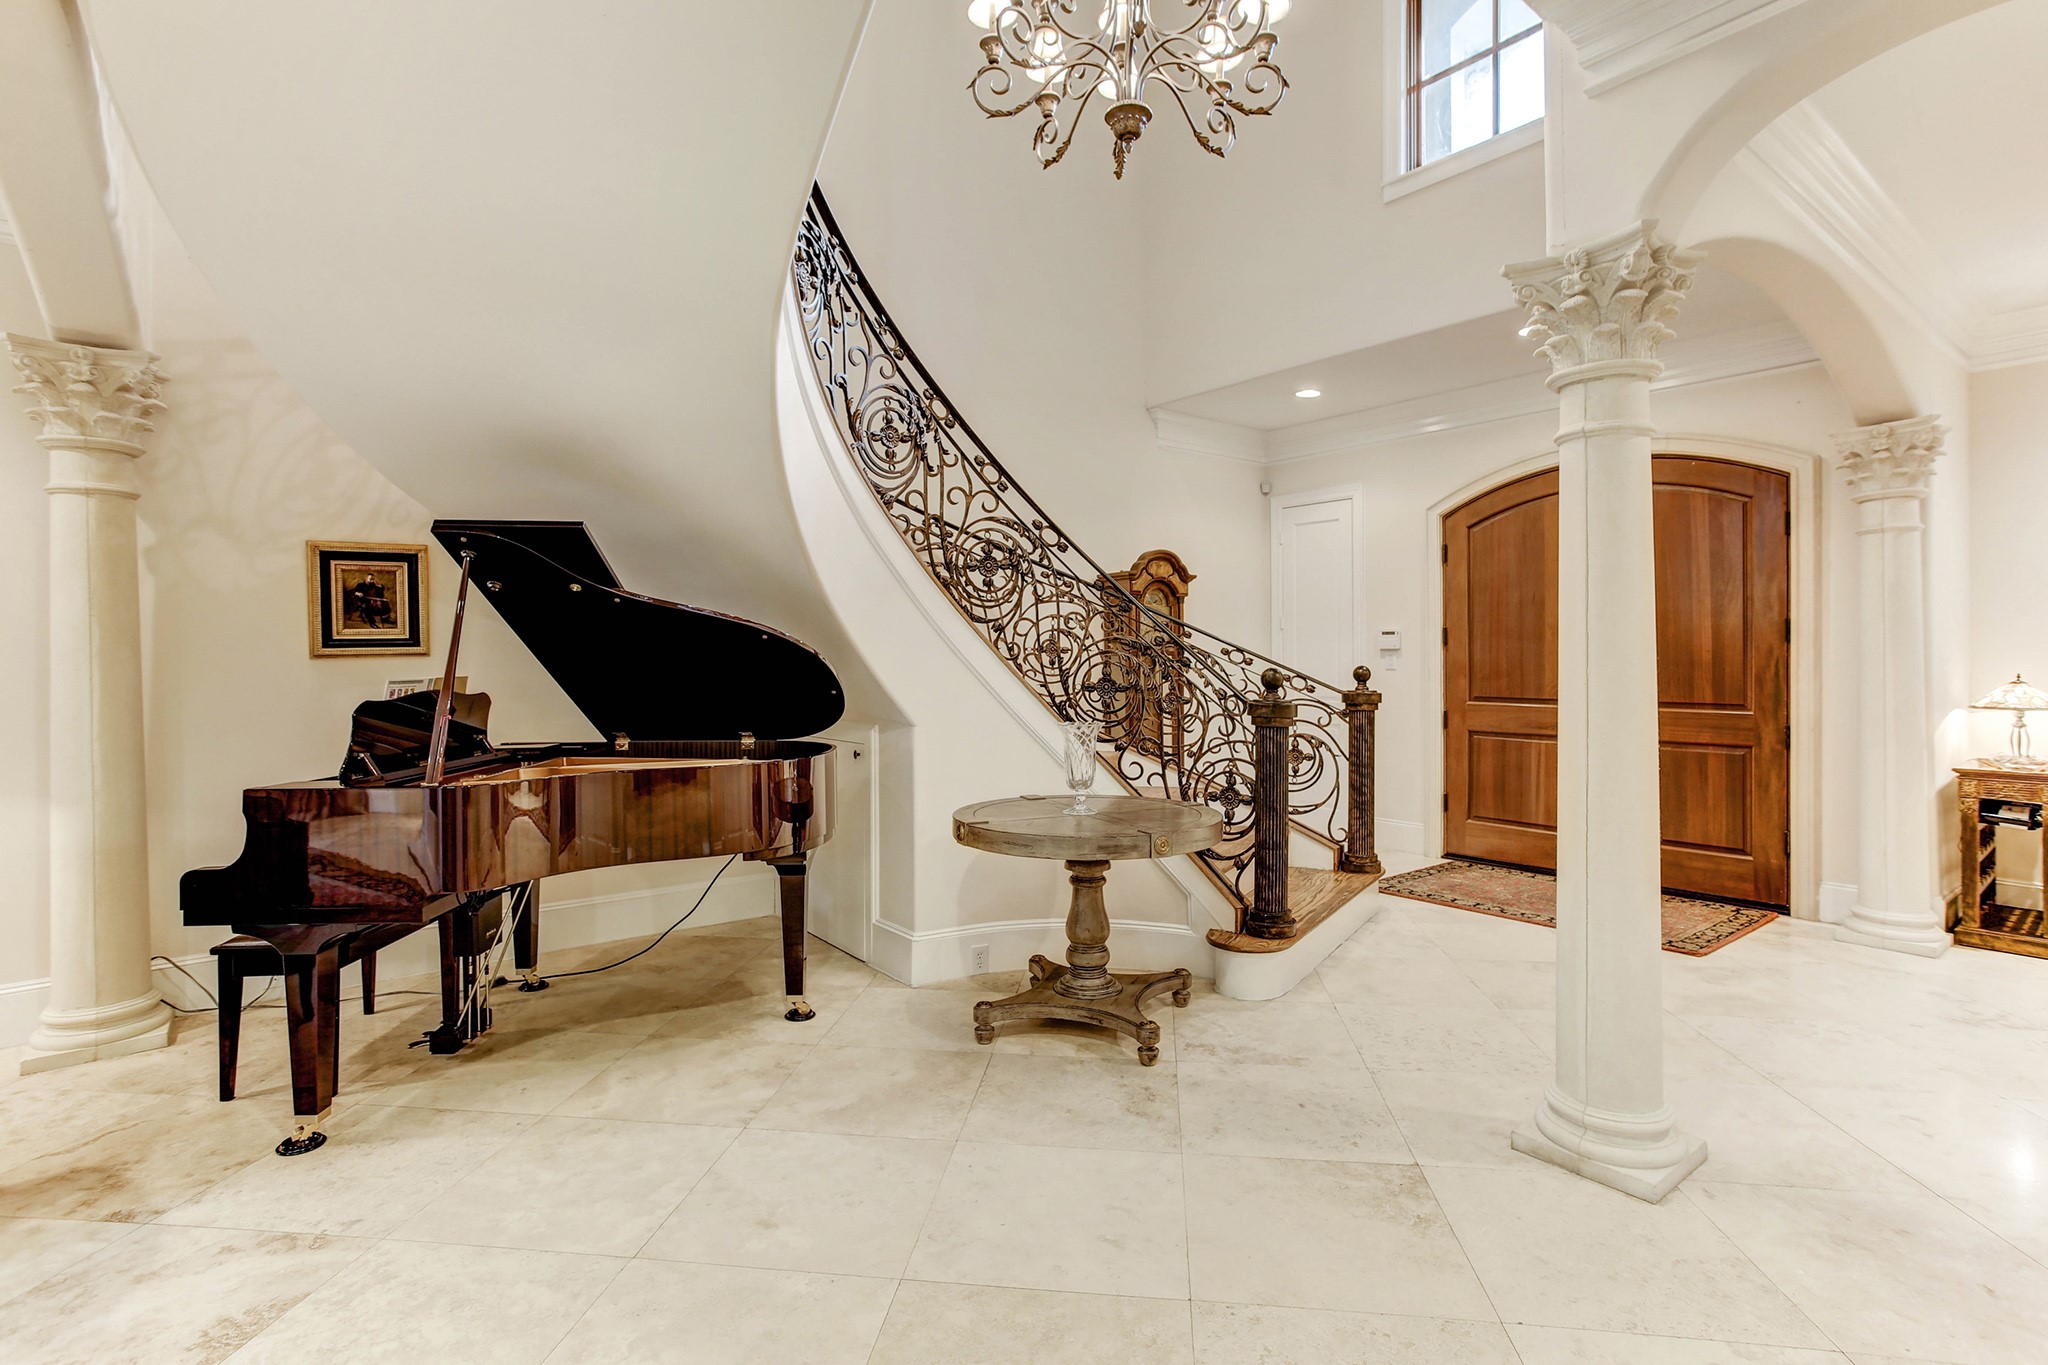 Great space for a that famed piano to entertain at your special gatherings!